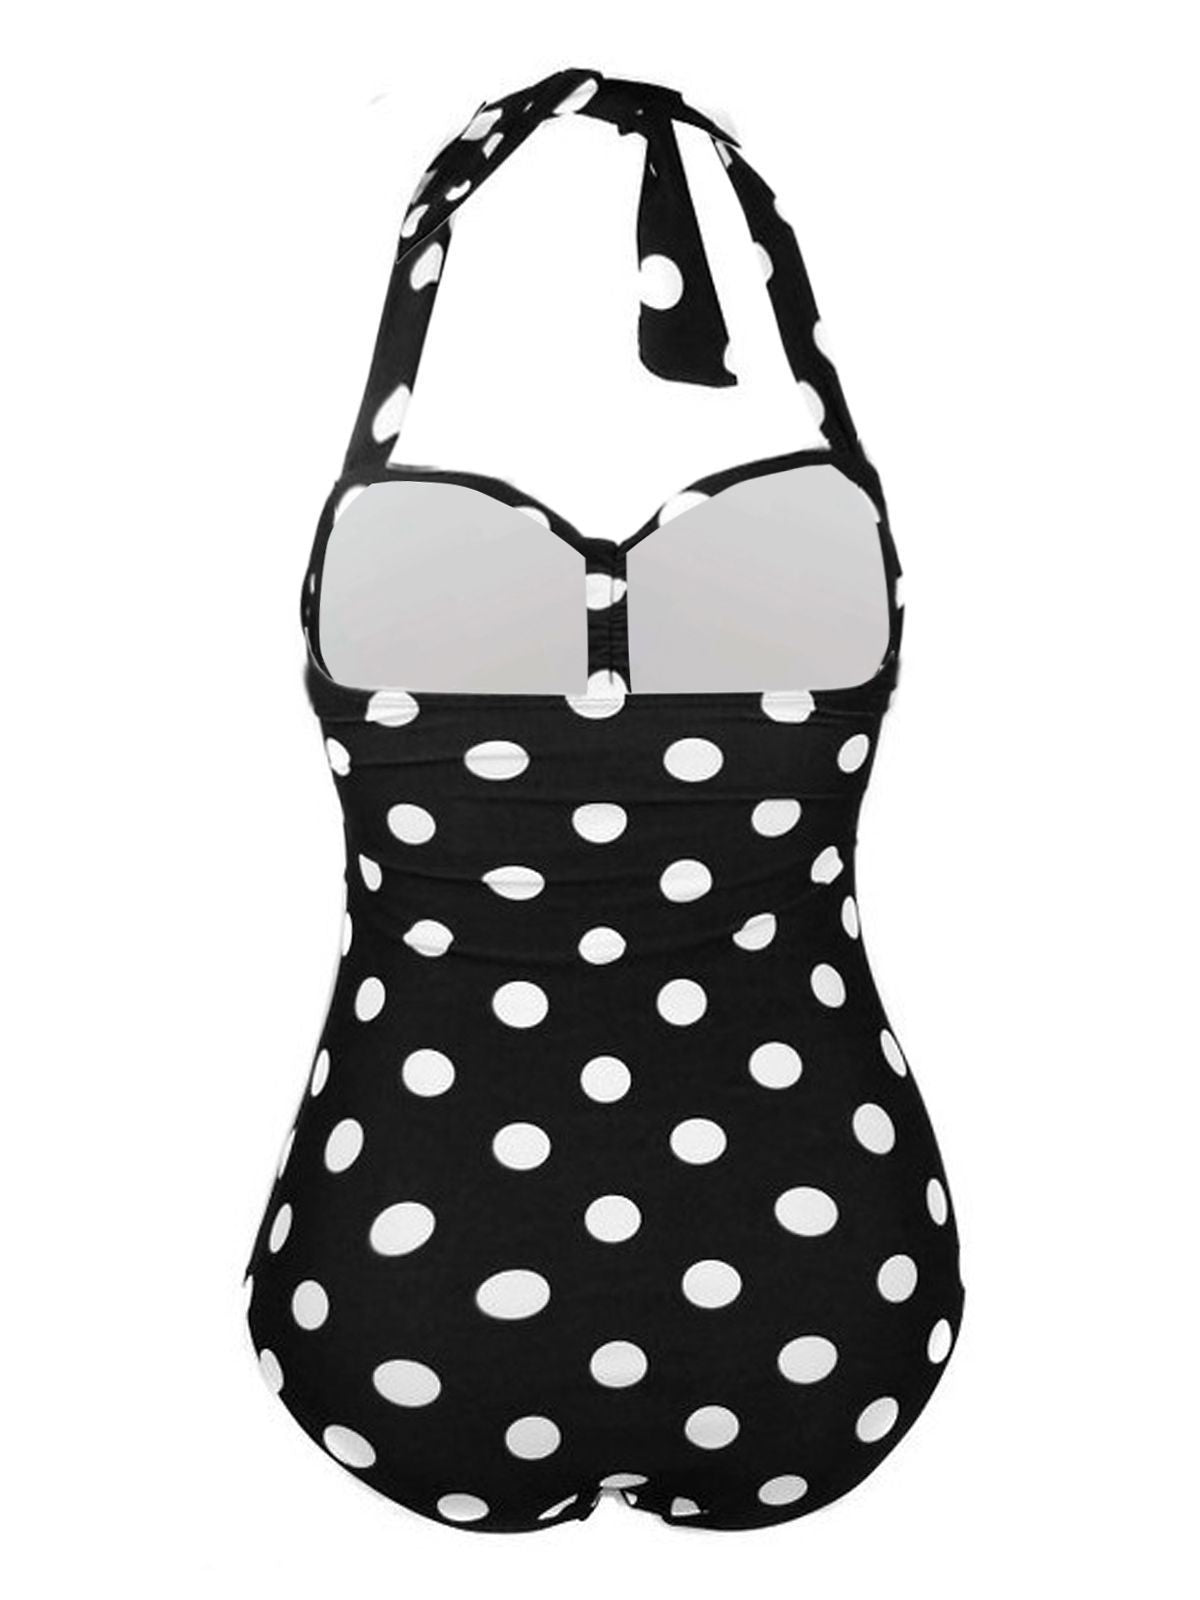 Upopby Halter Polka Dot One-Piece Swimsuit back details